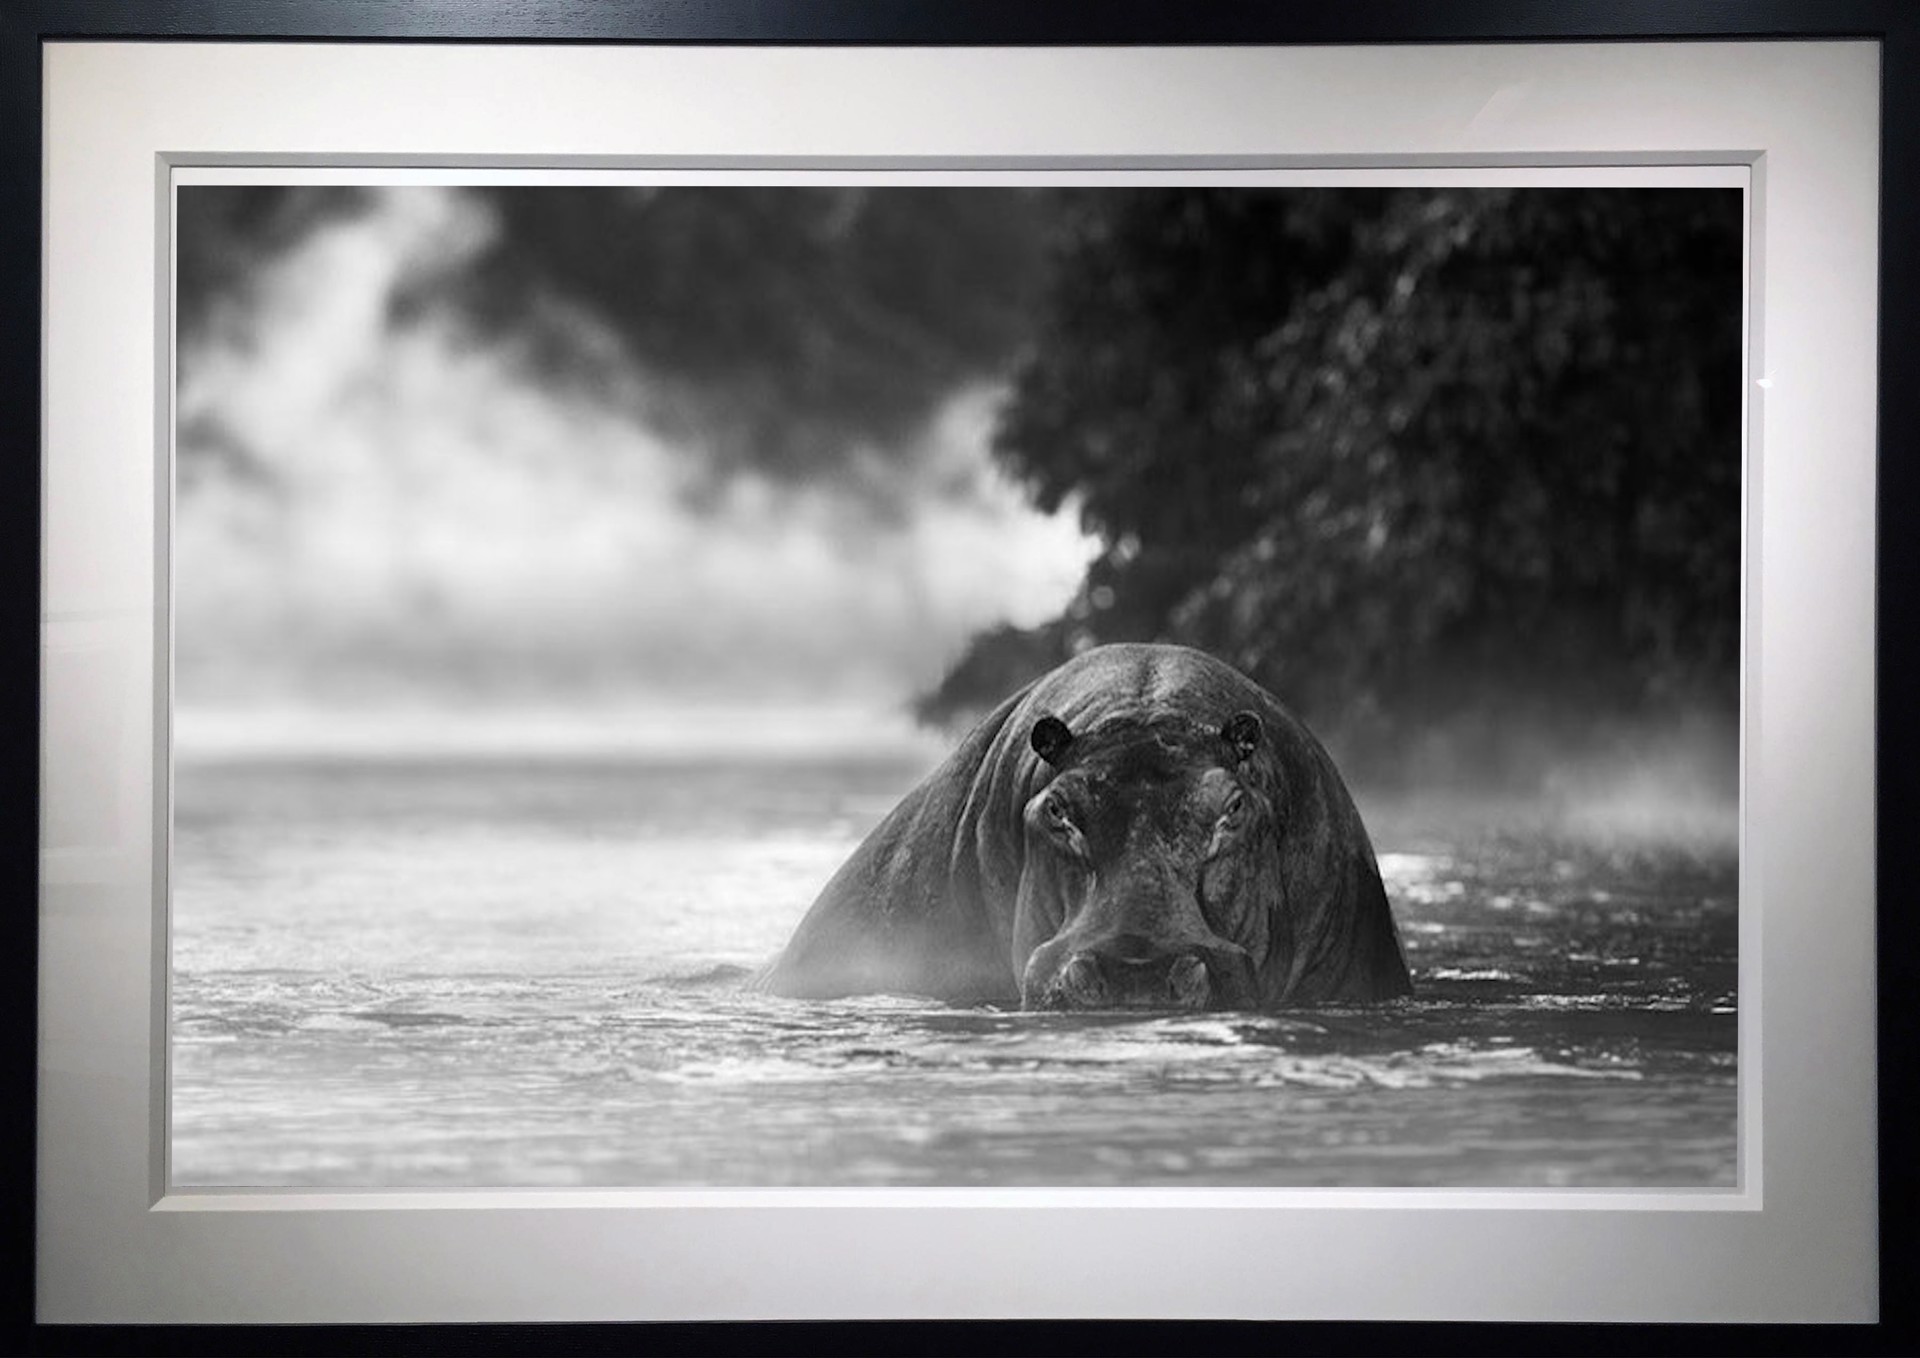 The River Monster by David Yarrow